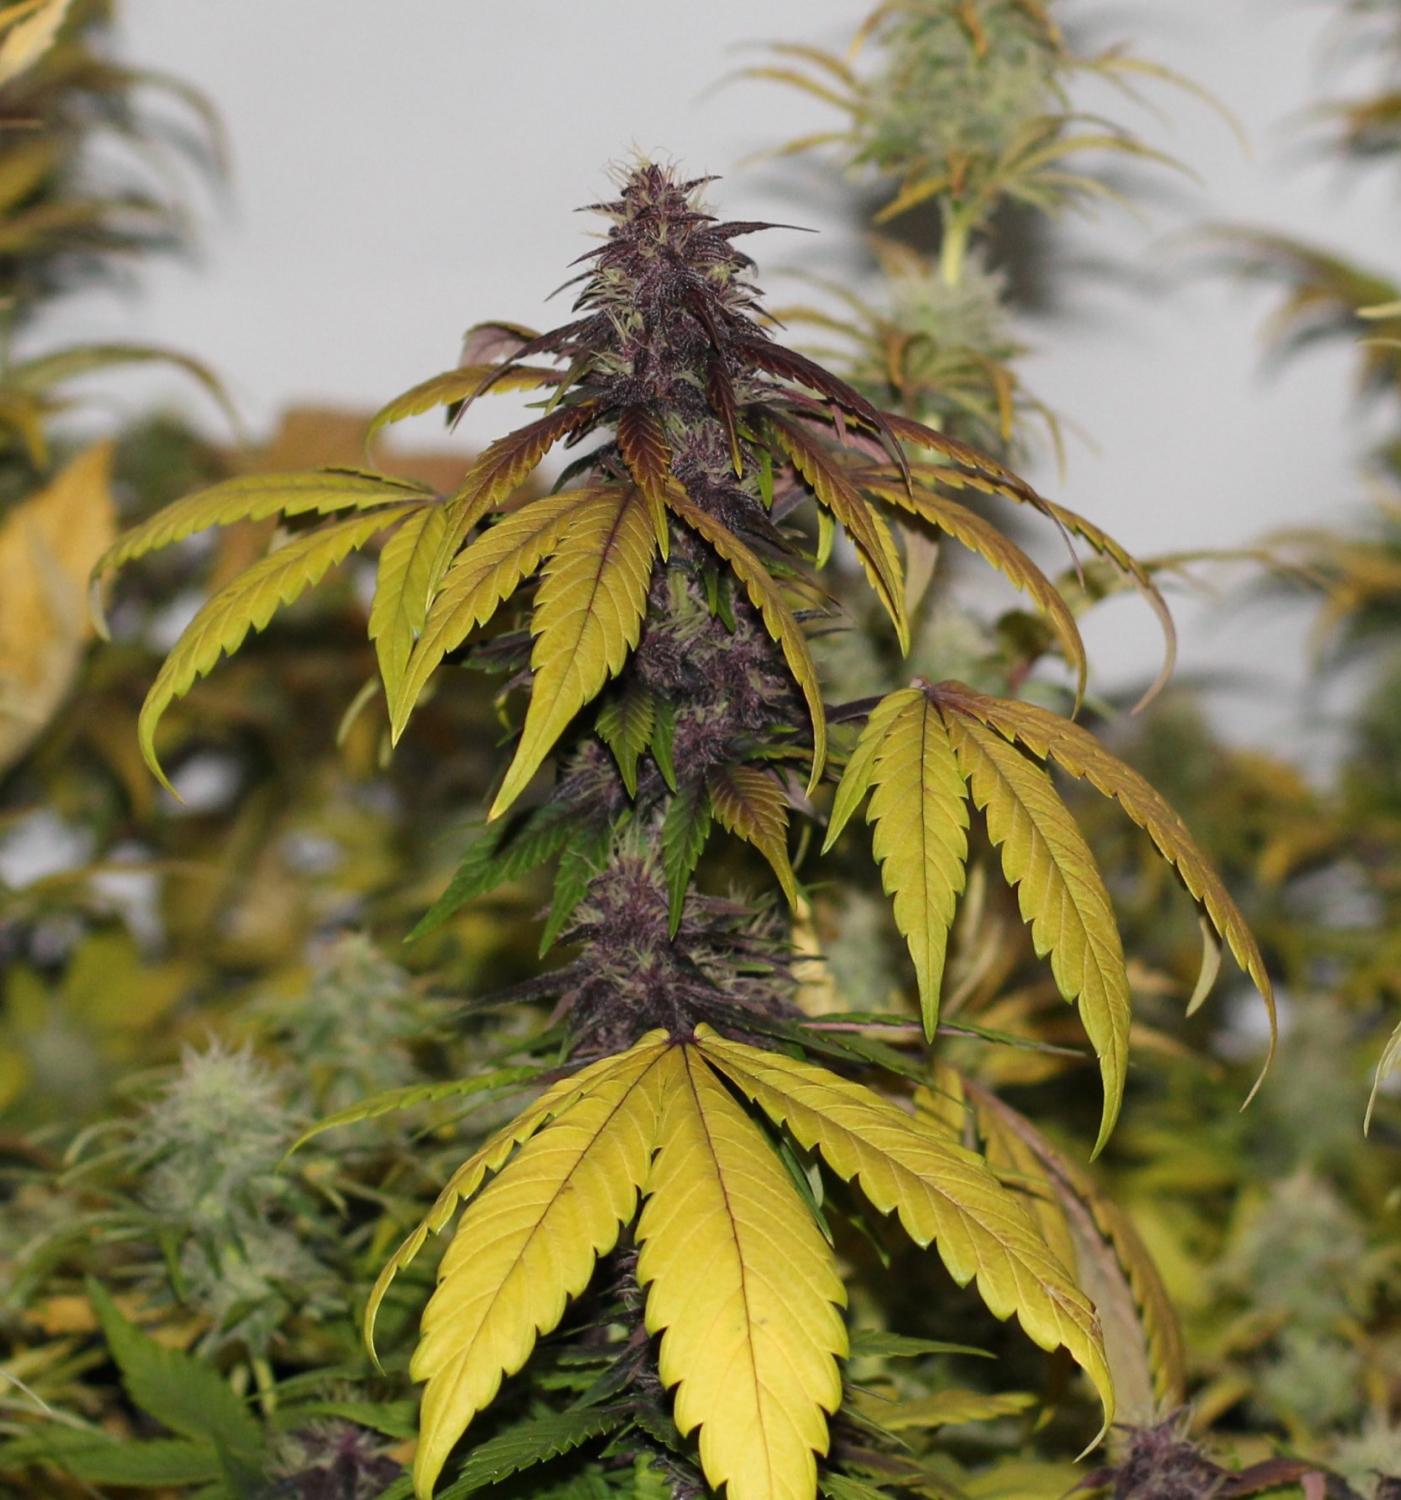 Dark Purple Auto is the result of the crossing between the powerful OG Kush...